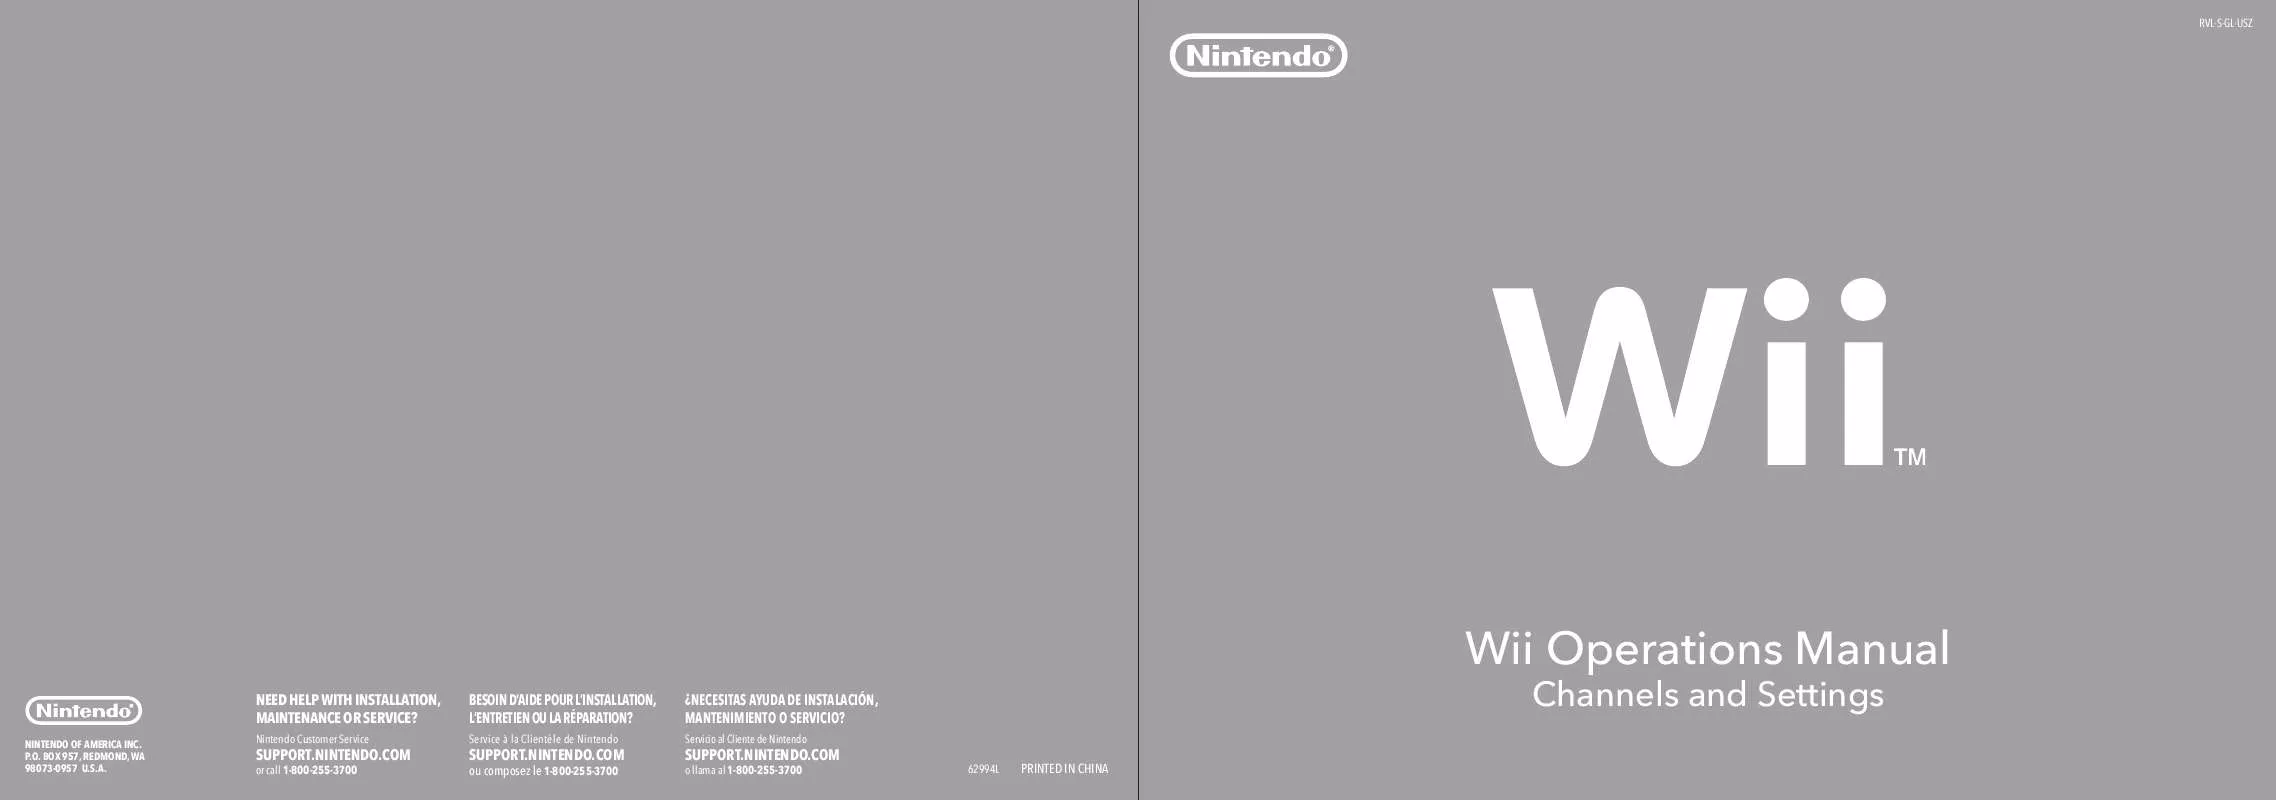 Mode d'emploi NINTENDO WII CHANNELS AND SETTINGS